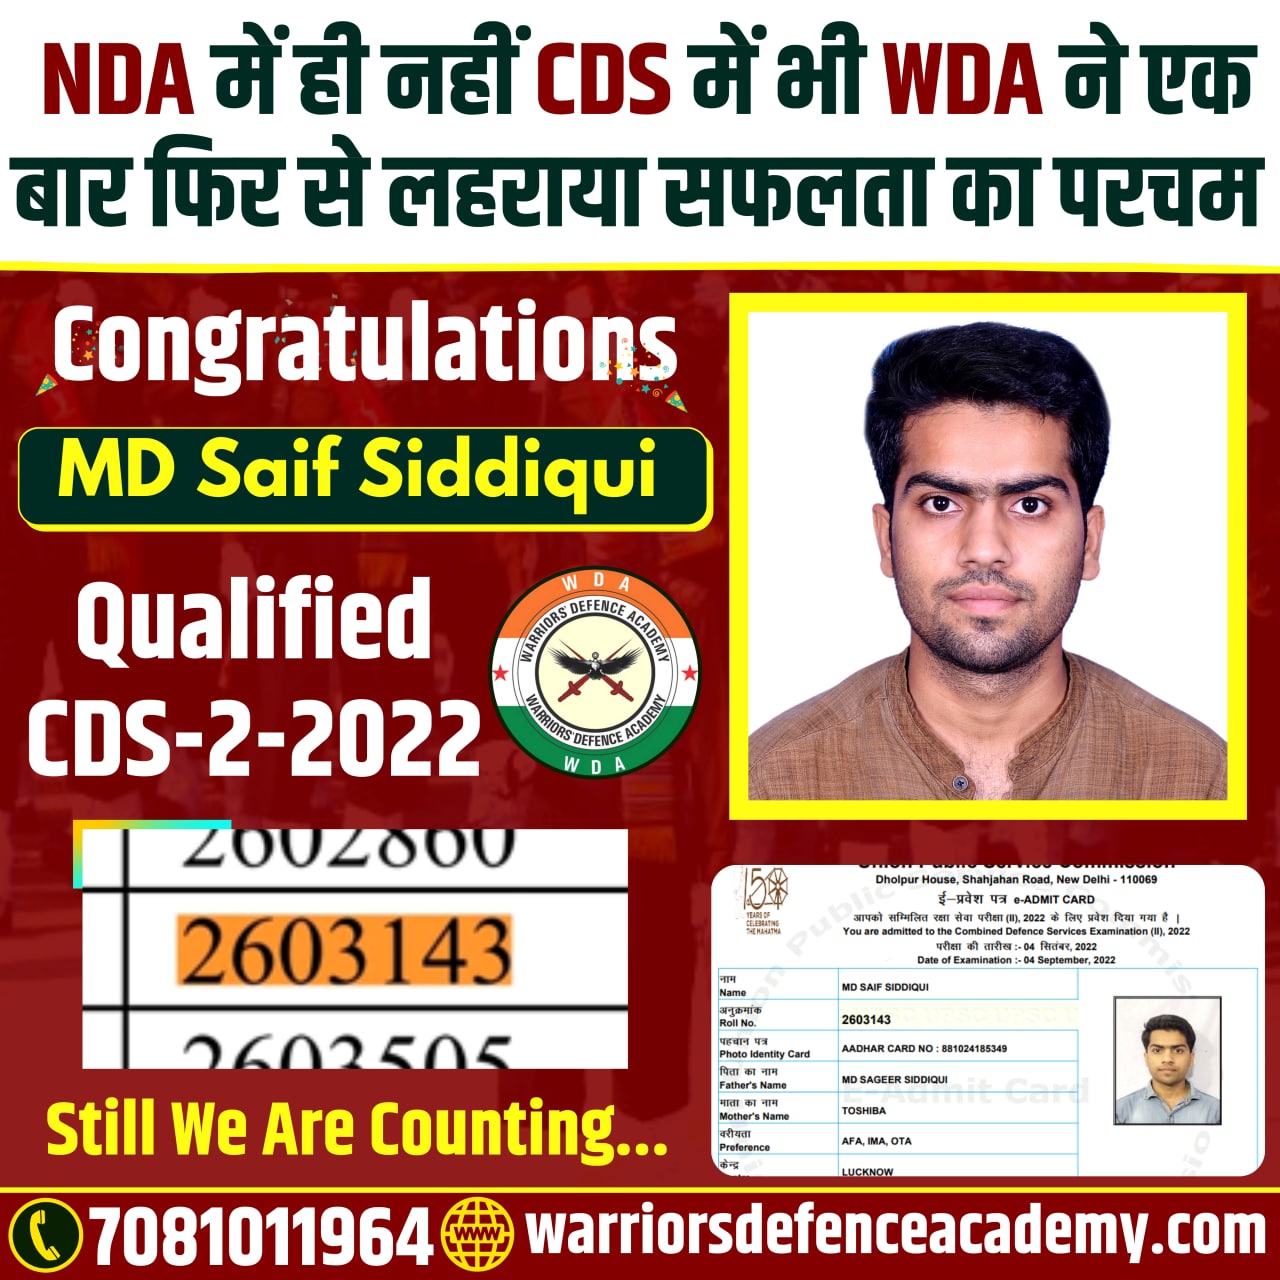 Best Defence Academy in Lucknow | Warriors Defence Academy Best NDA Coaching in Lucknow